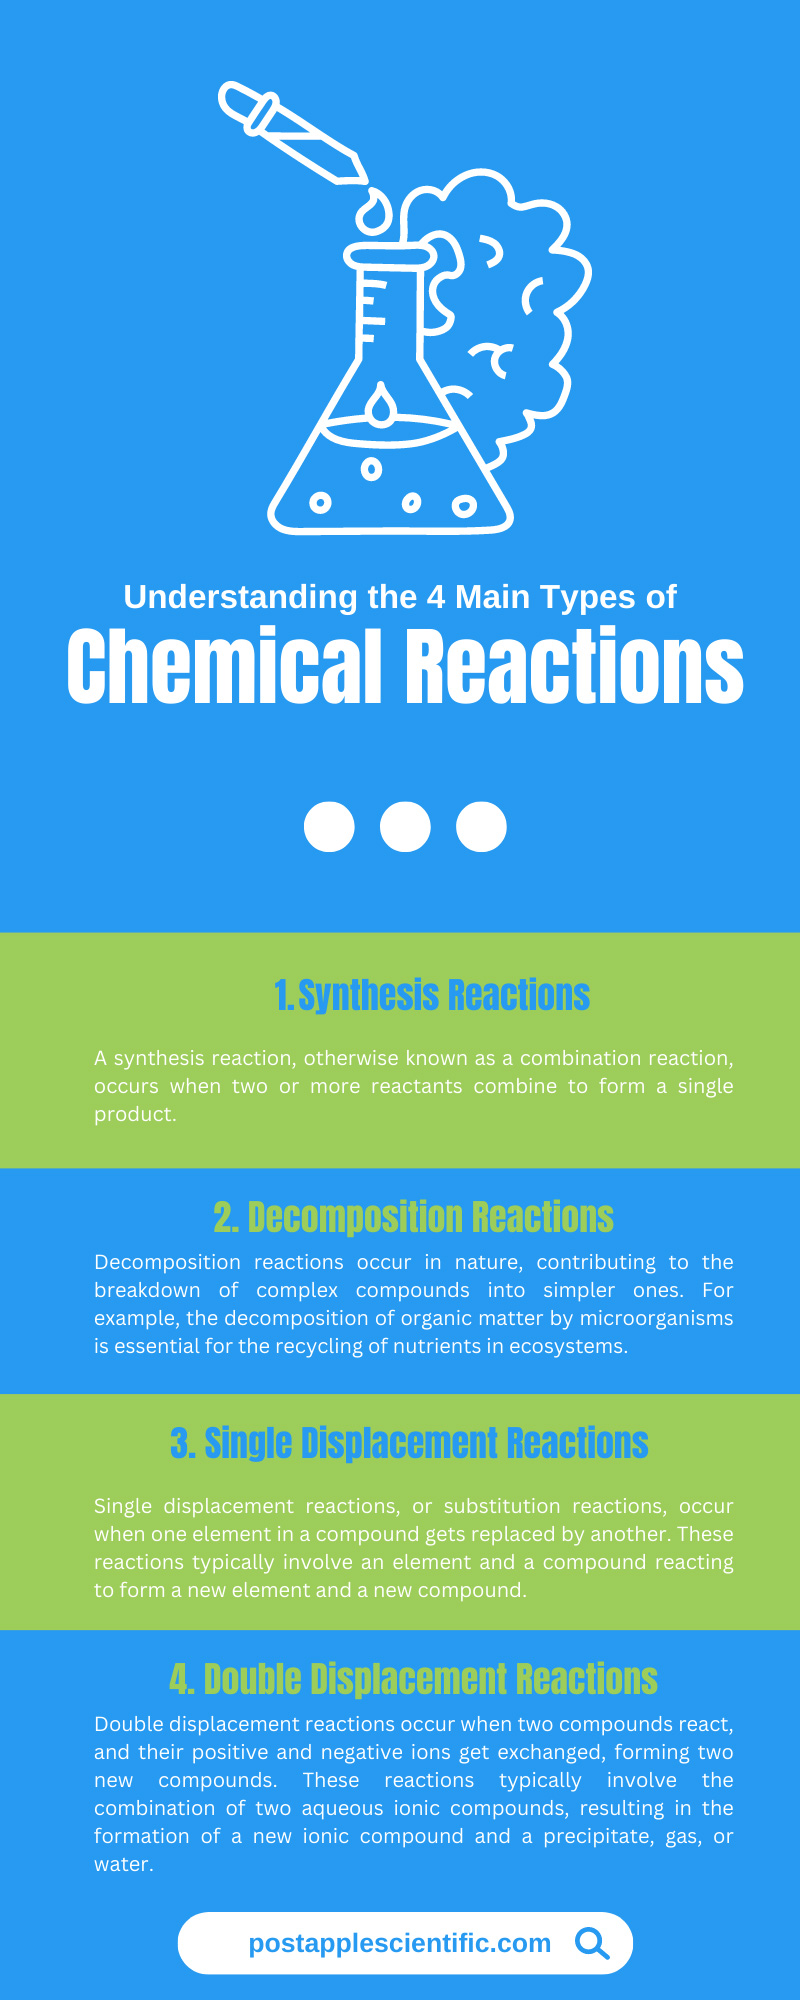 Understanding the 4 Main Types of Chemical Reactions